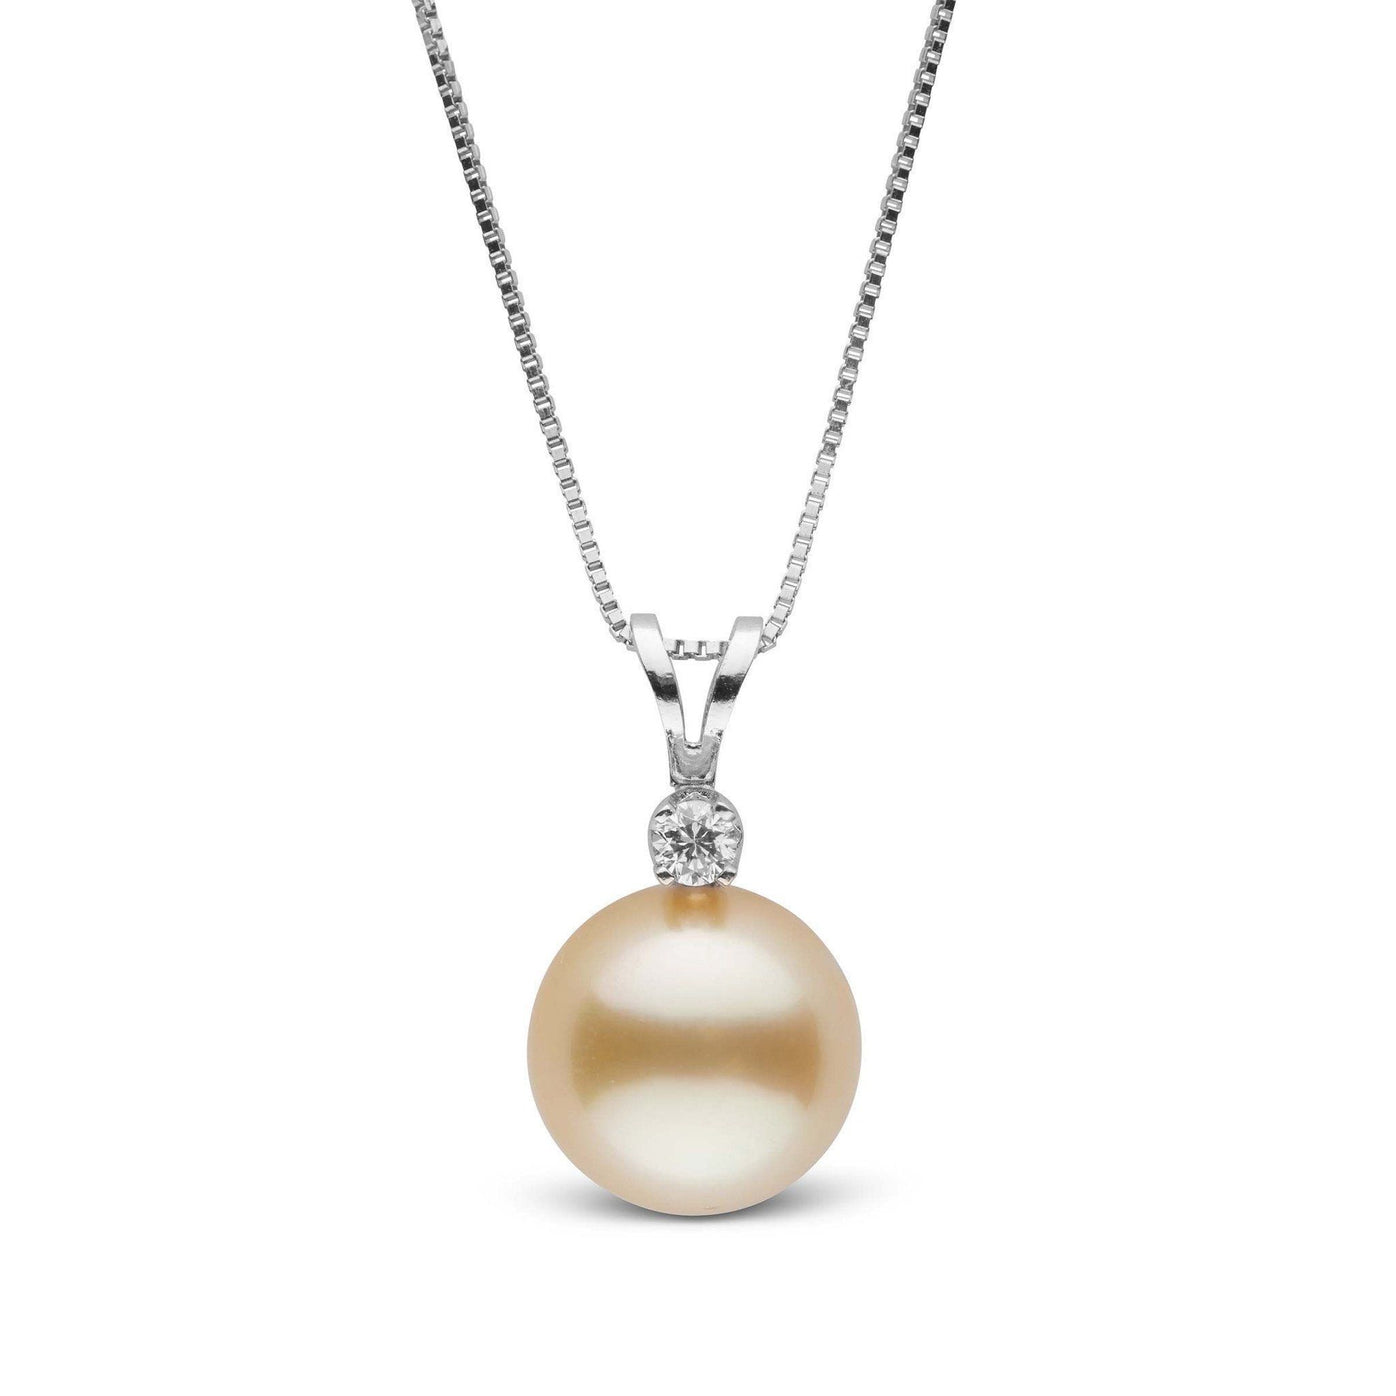 Golden South Sea Pearls – Pearl Paradise